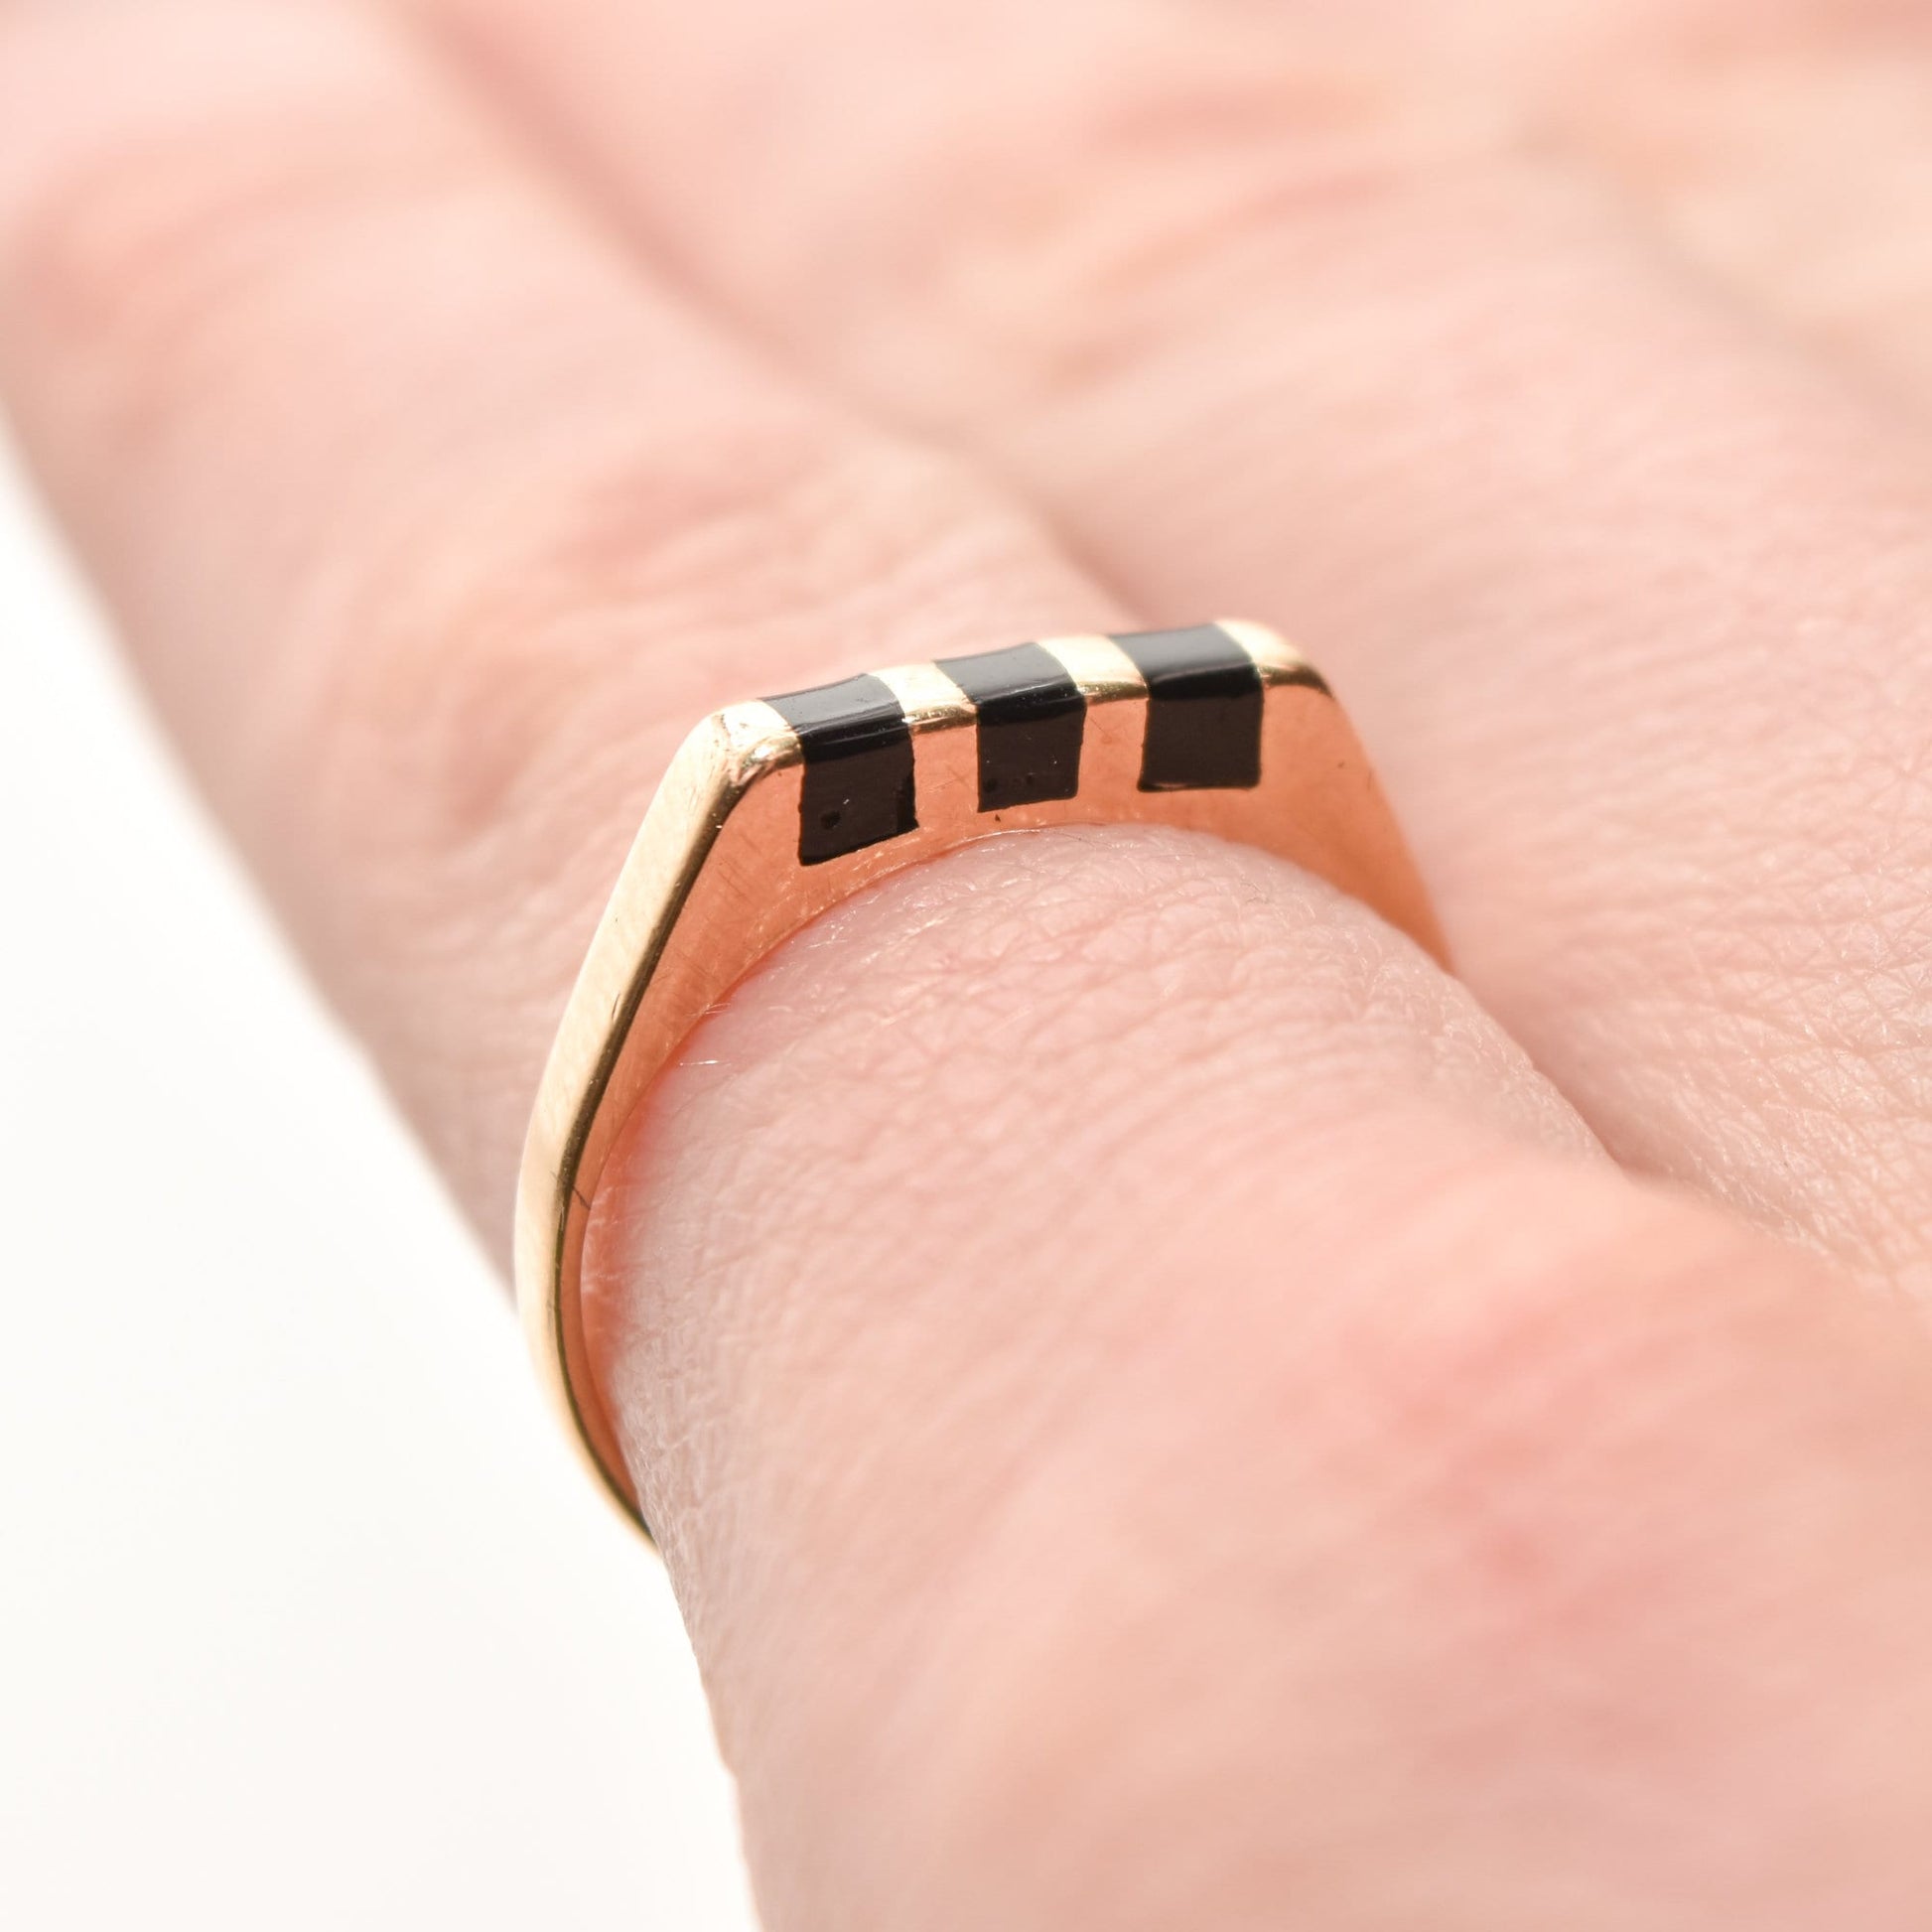 Minimalist 14K yellow gold stacking ring with black onyx inlay on a finger, size 5.5 US.